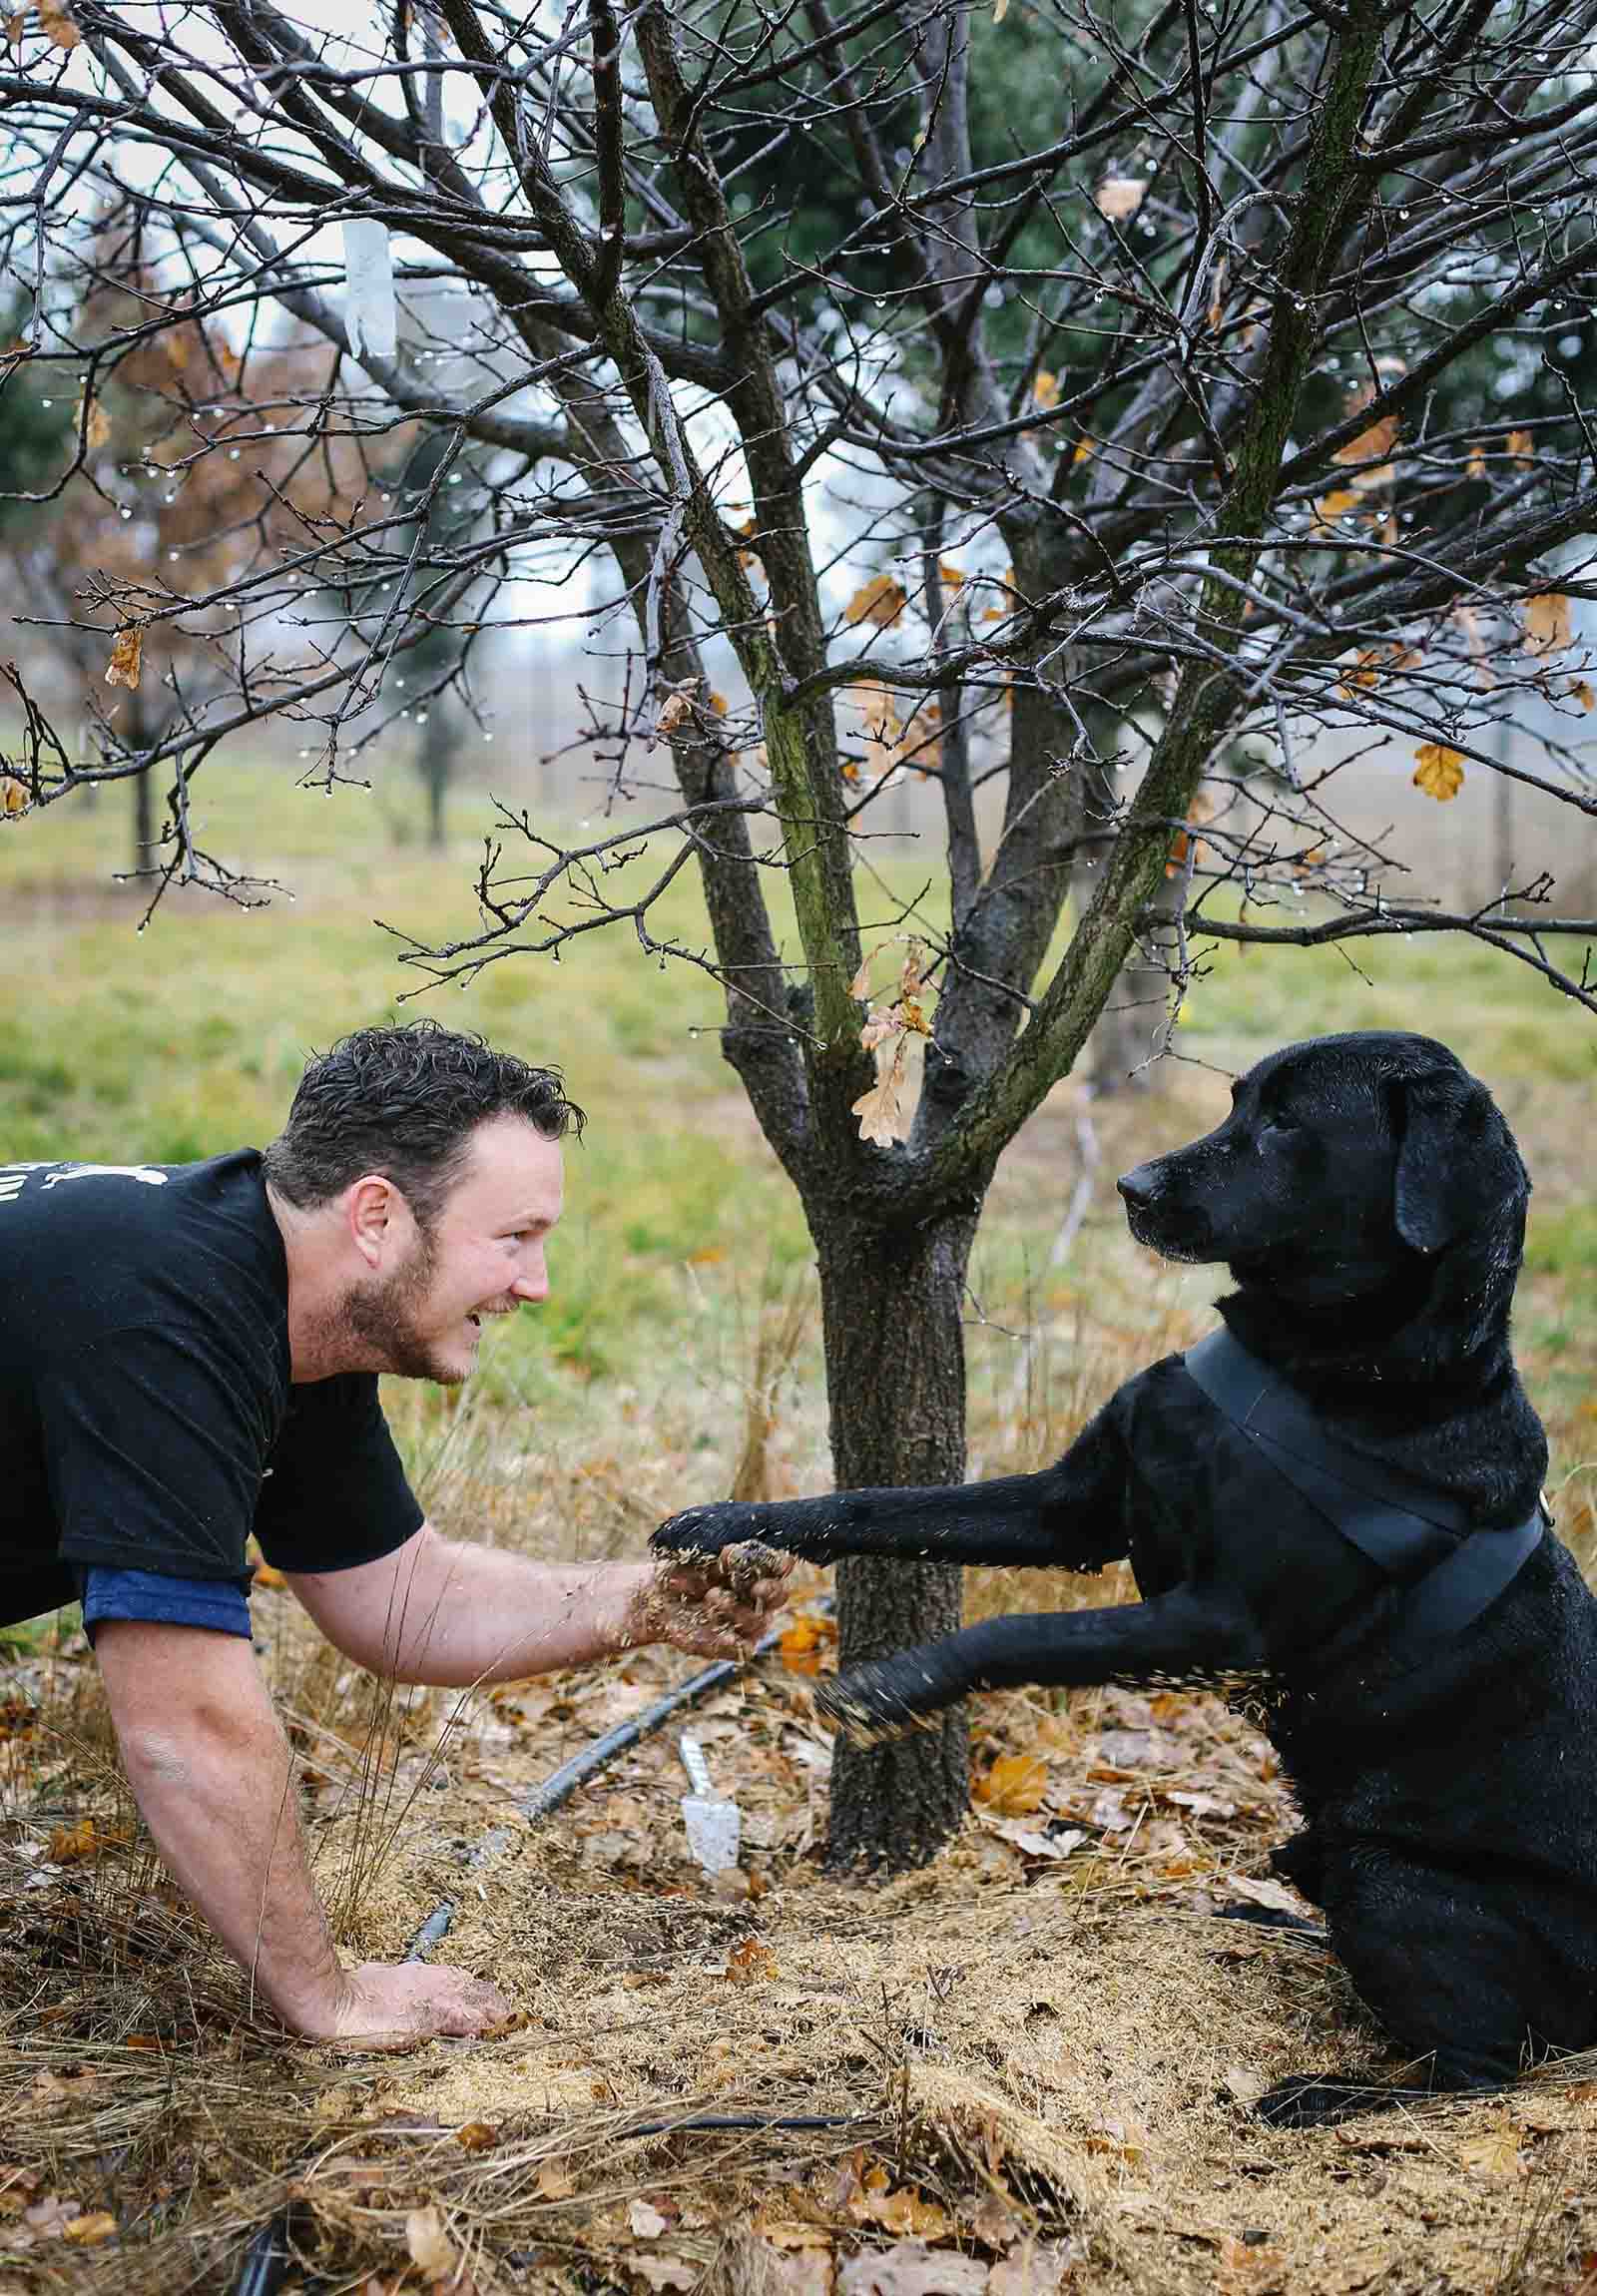 Jayson Mesman and one of his hunters at The Truffle Farm, Canberra | Join the truffle hunt